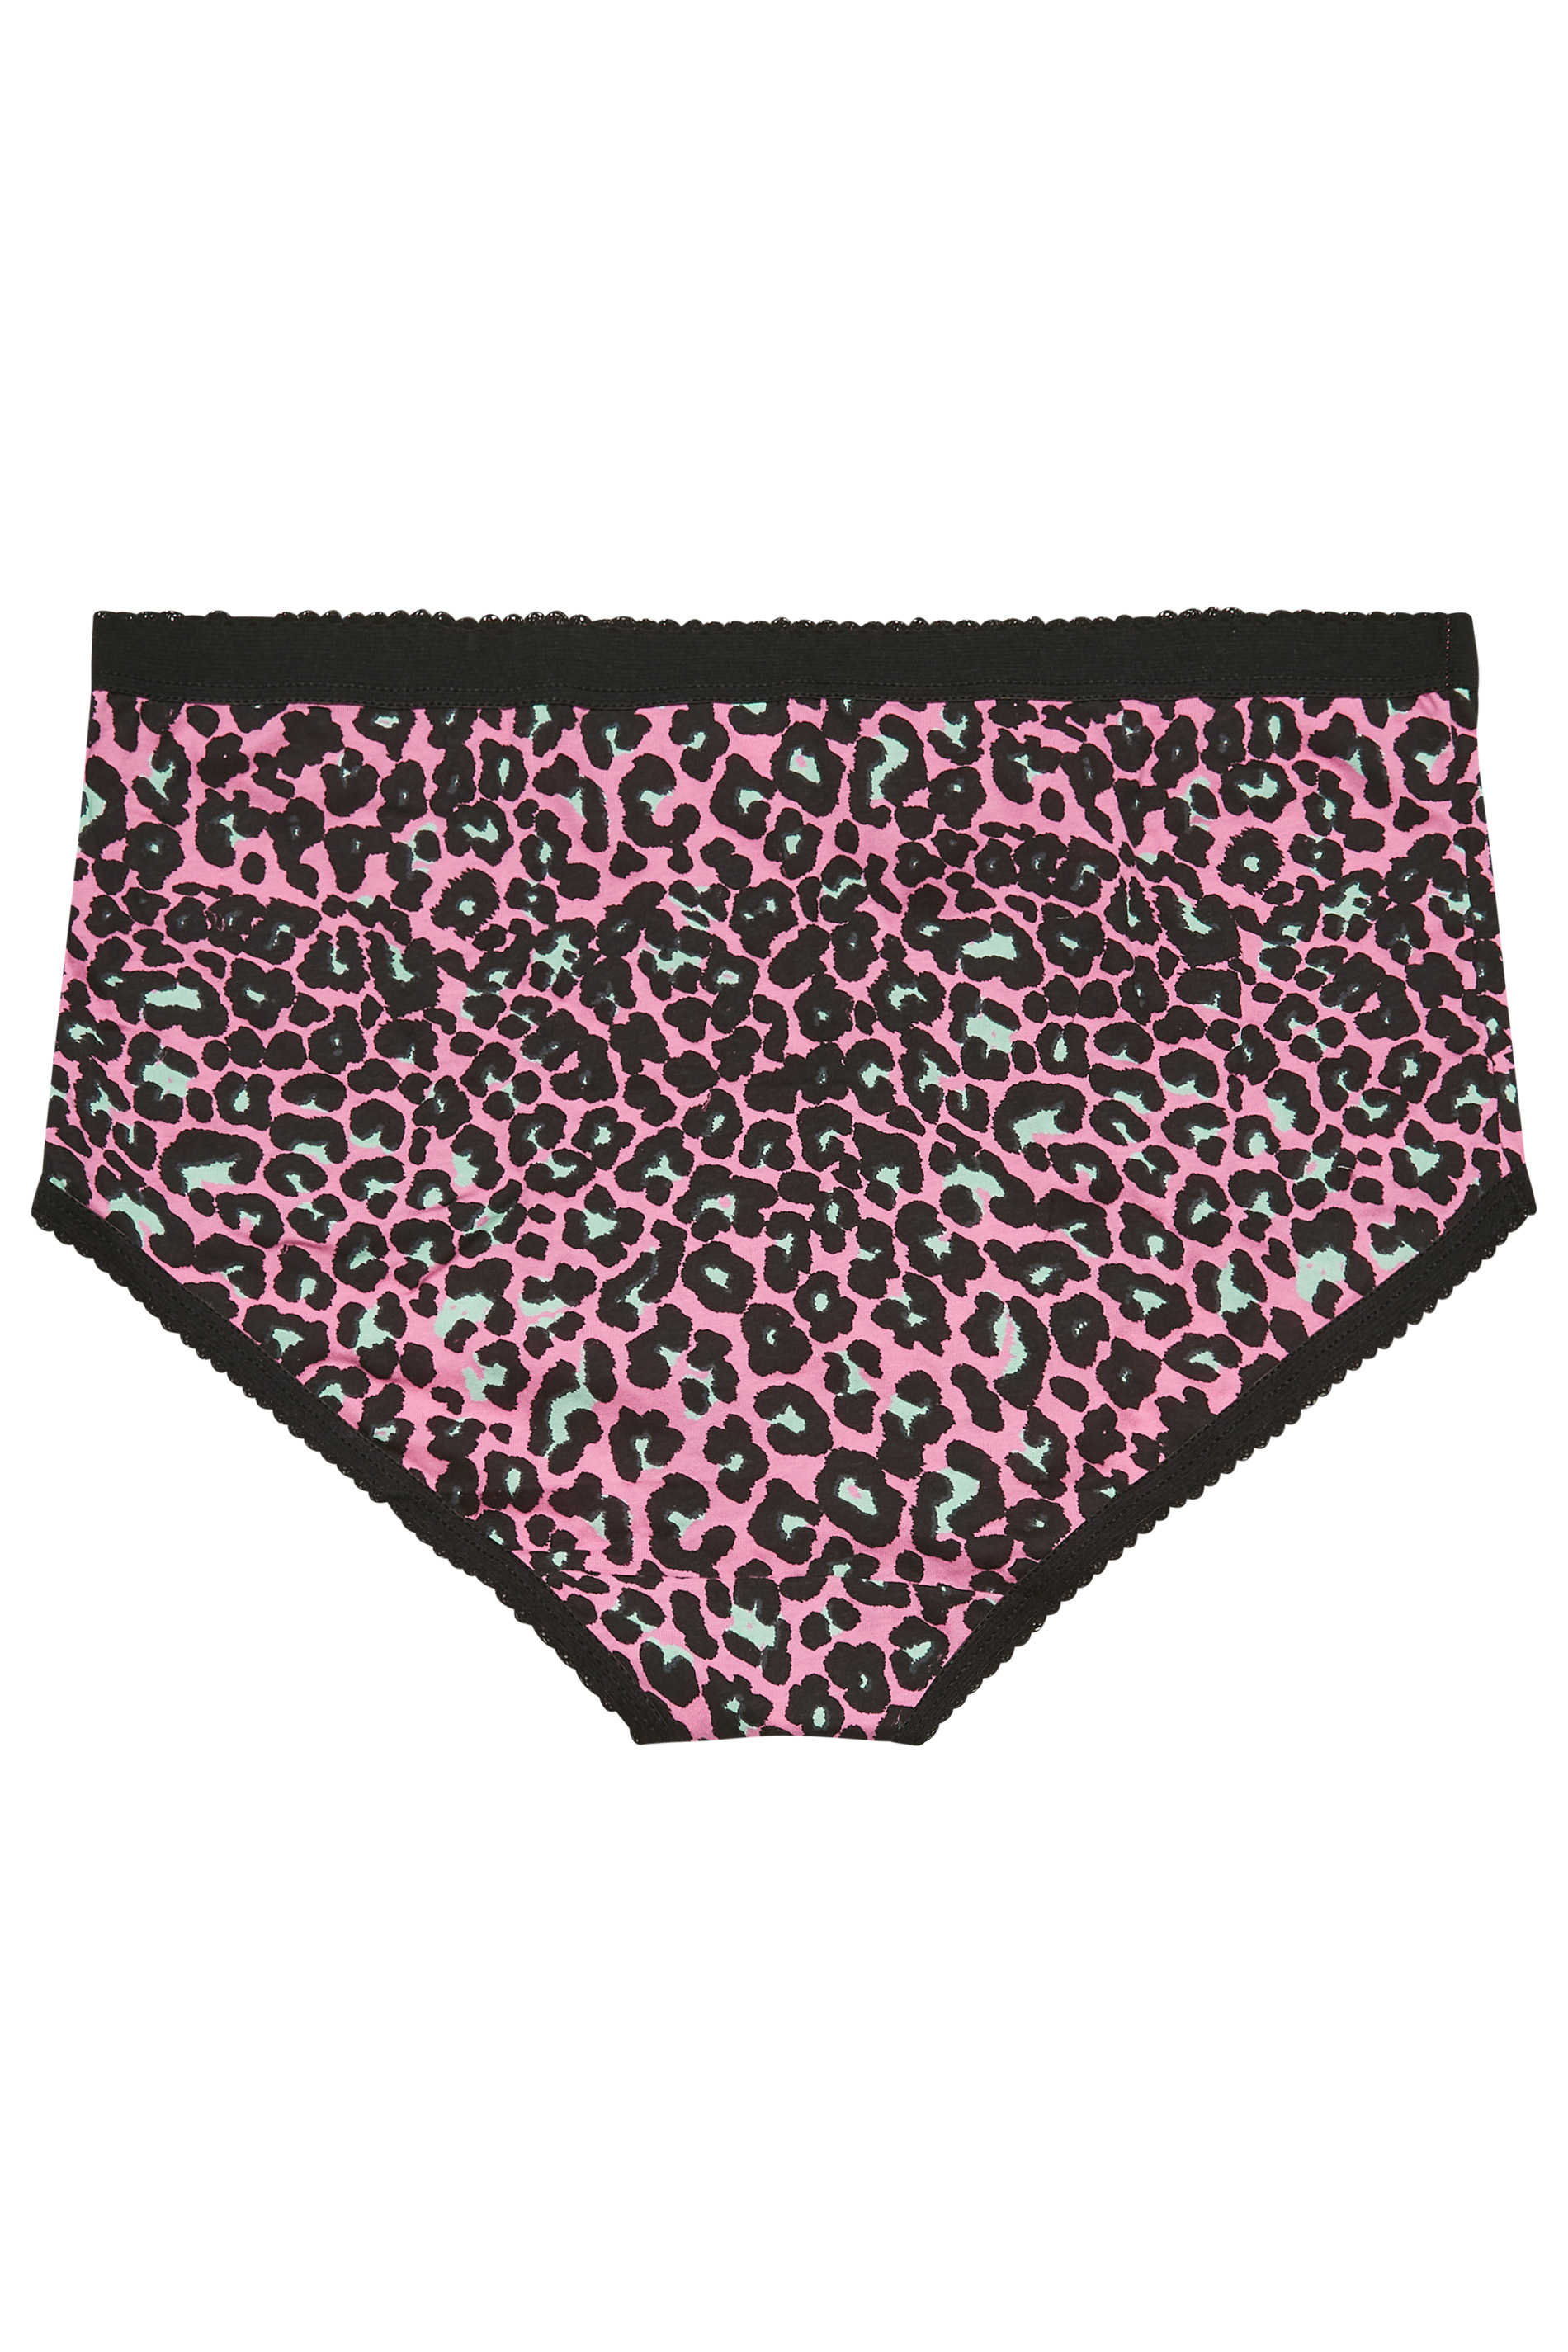 Buy Hole Hearted Yours – Pink Panties (Large) at